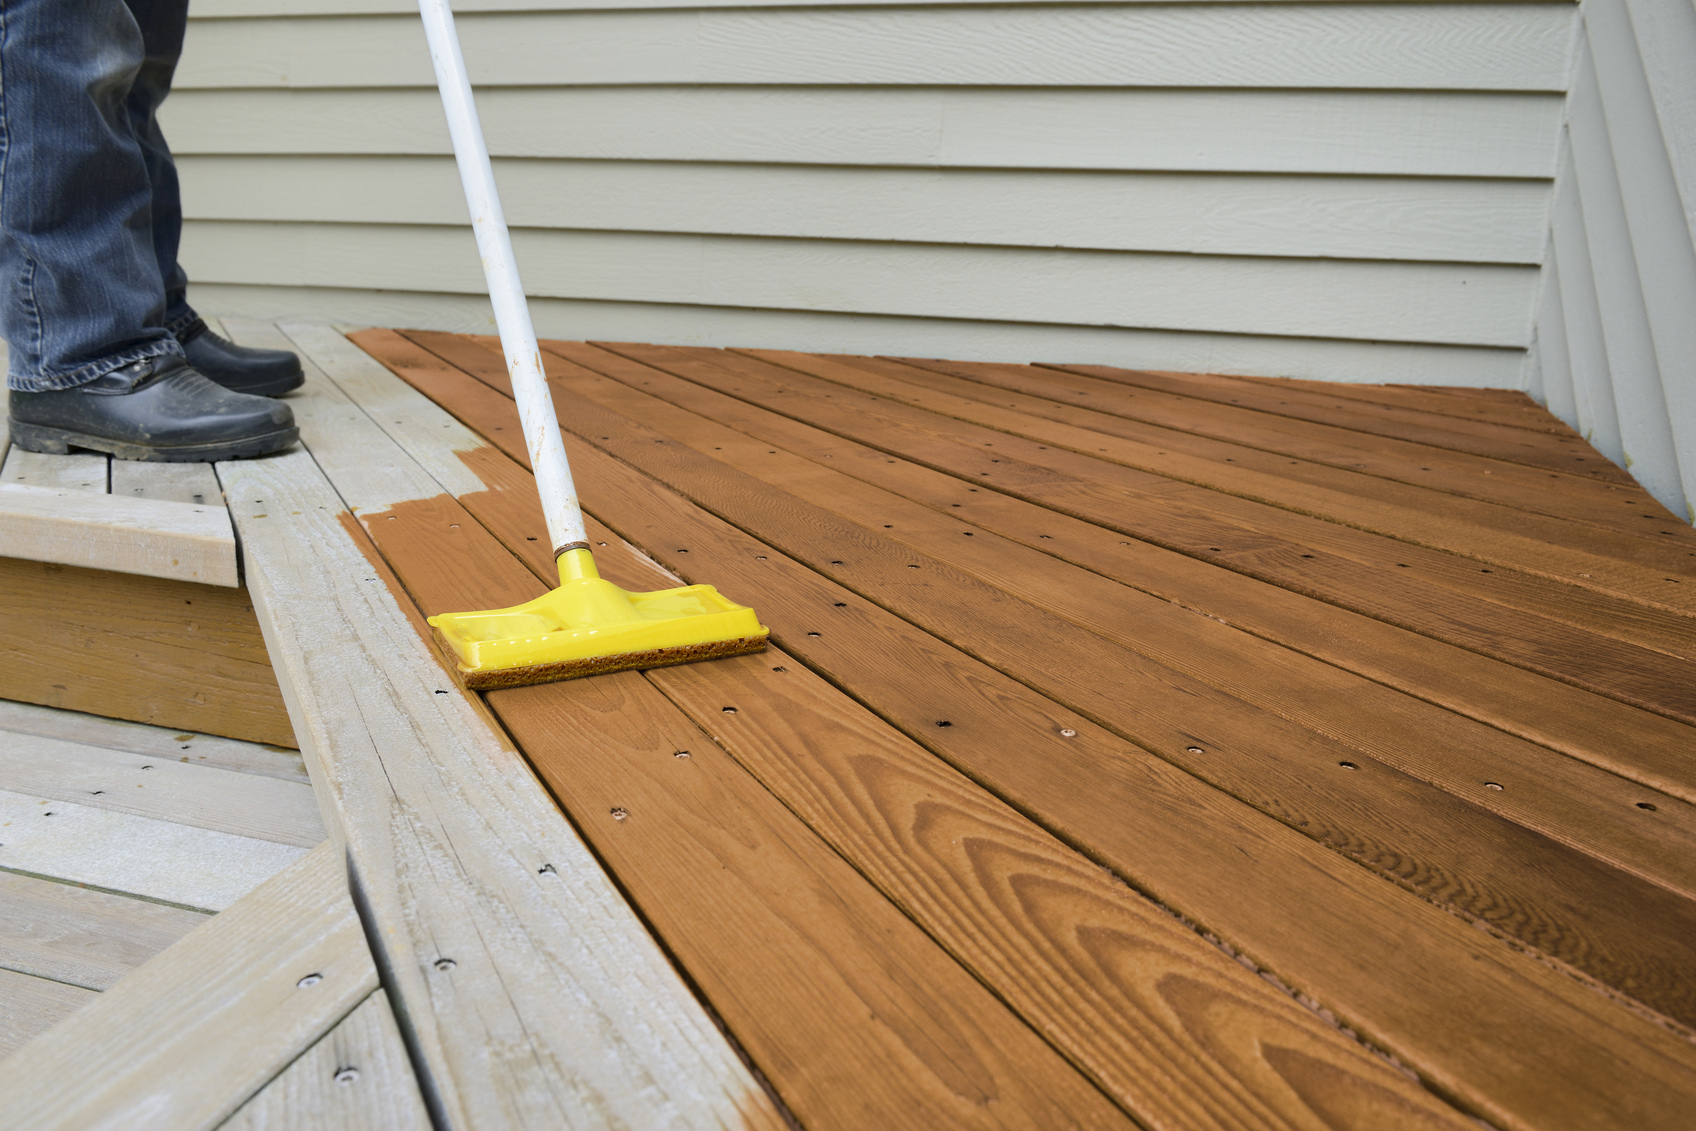 10 Best Rated Deck Stains Lovetoknow in dimensions 1696 X 1131